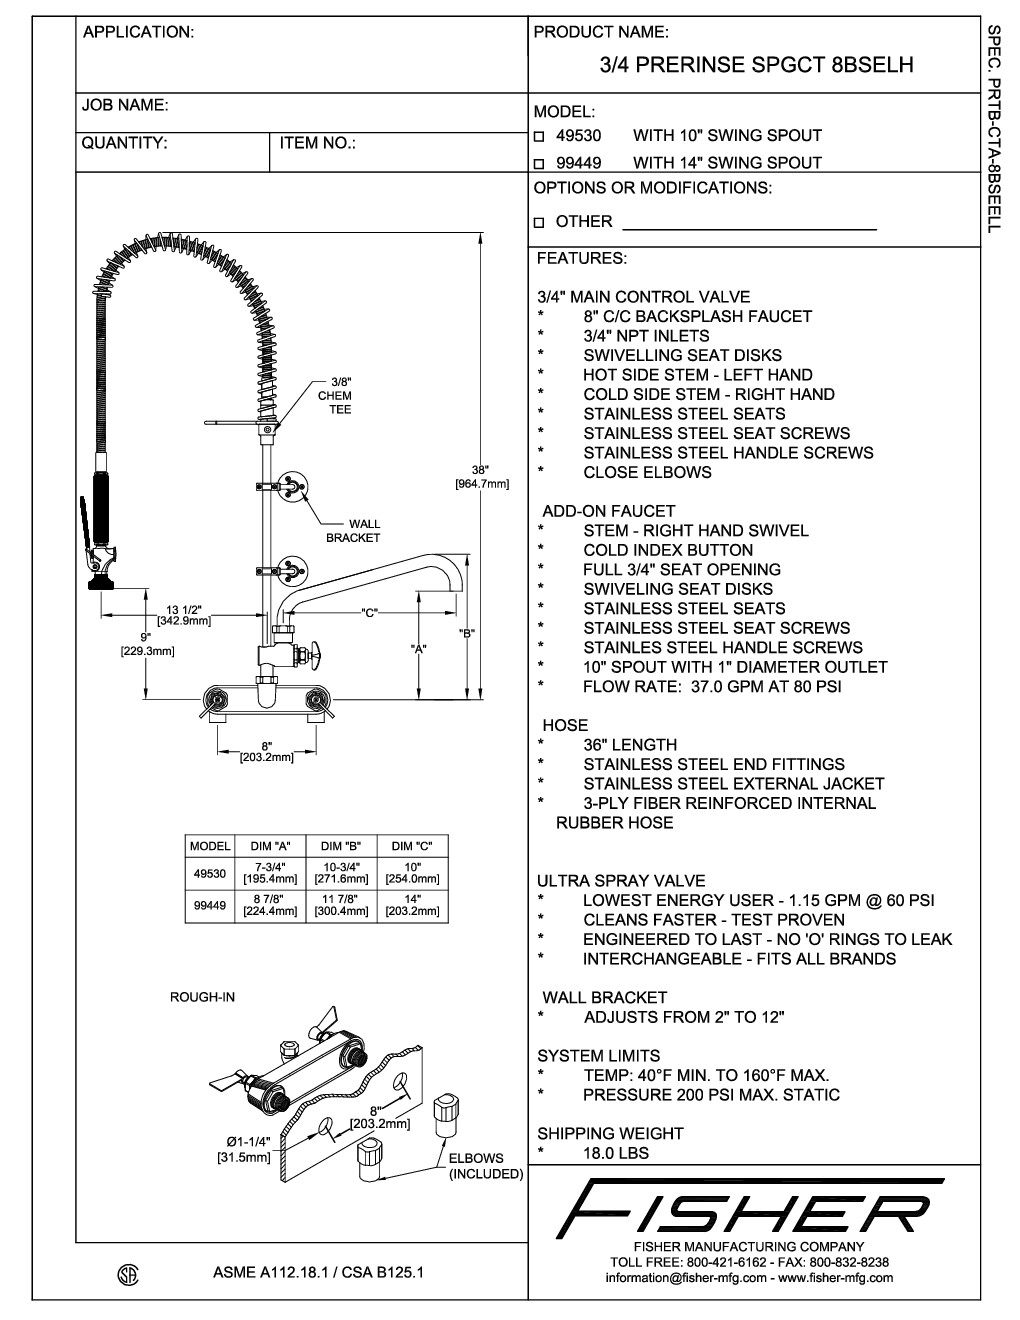 Fisher 99449 with Add On Faucet Pre-Rinse Faucet Assembly